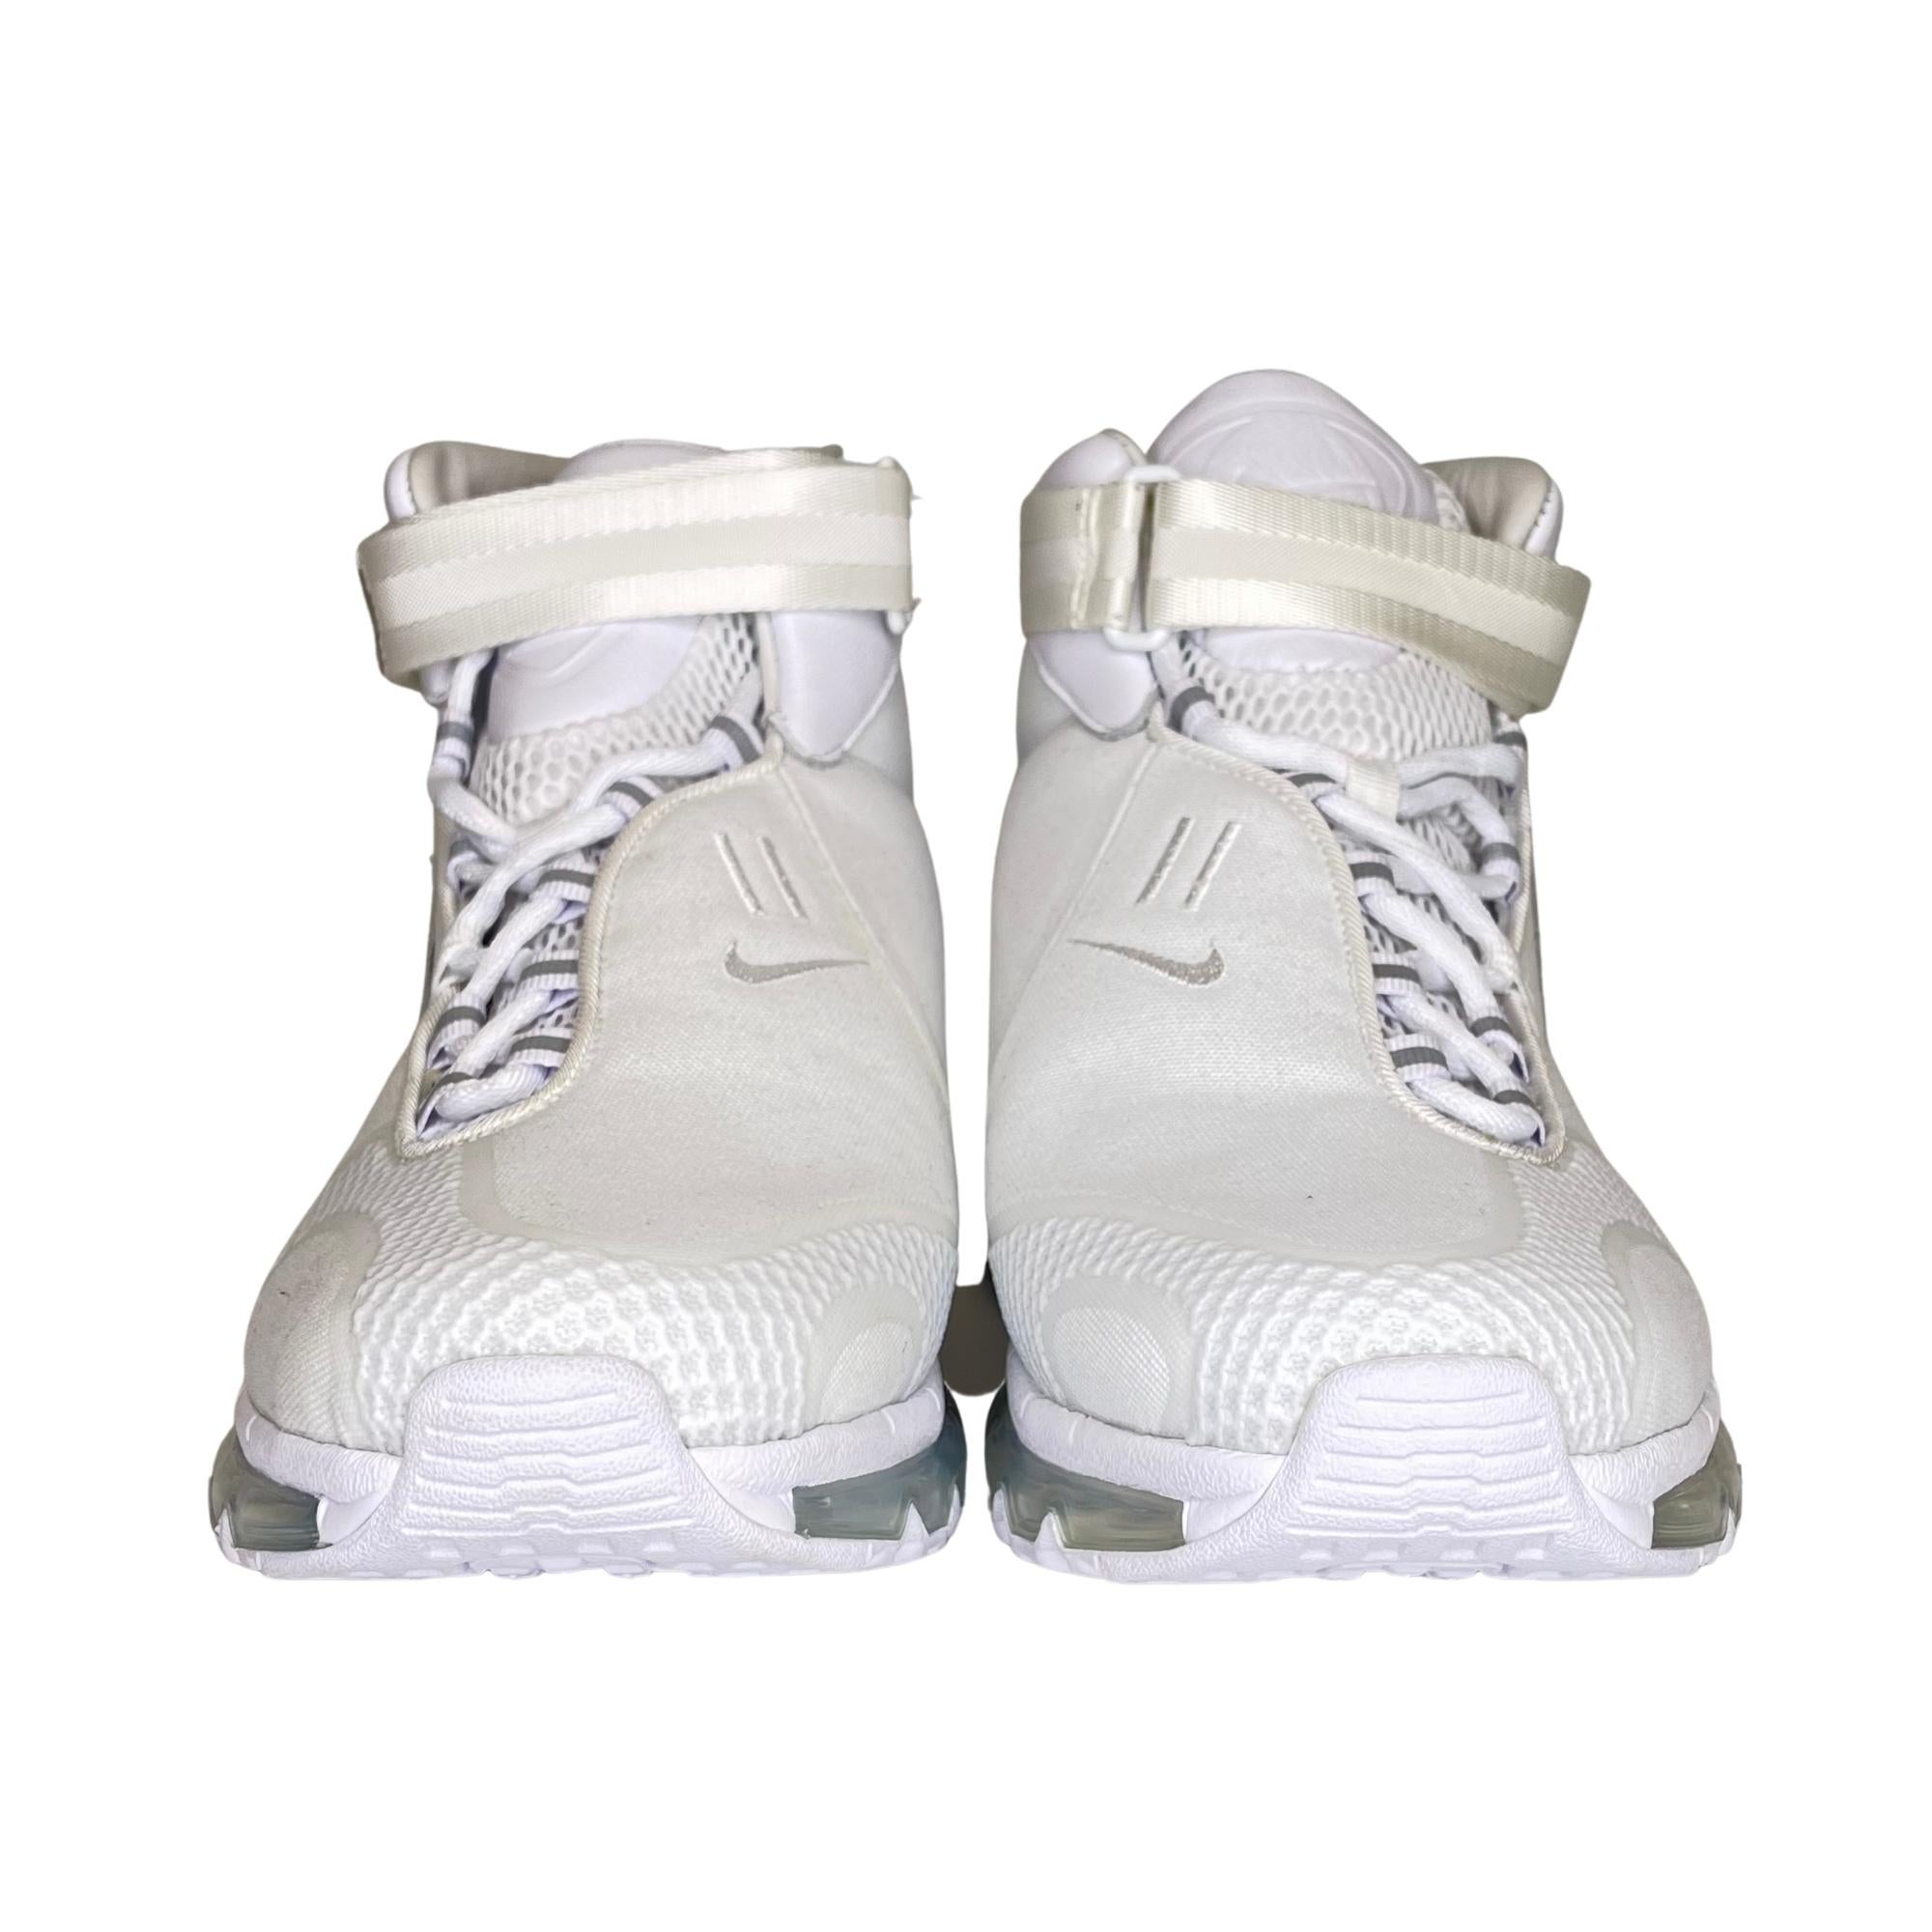 Kim Jones, Dior Men's artistic director, released this NikeLab sneaker in June 2018, which takes inspiration from various Nike silhouettes. The Kim Jones x Air Max 360 High KJ 'White' is constructed with an all-white upper and 3M application on the